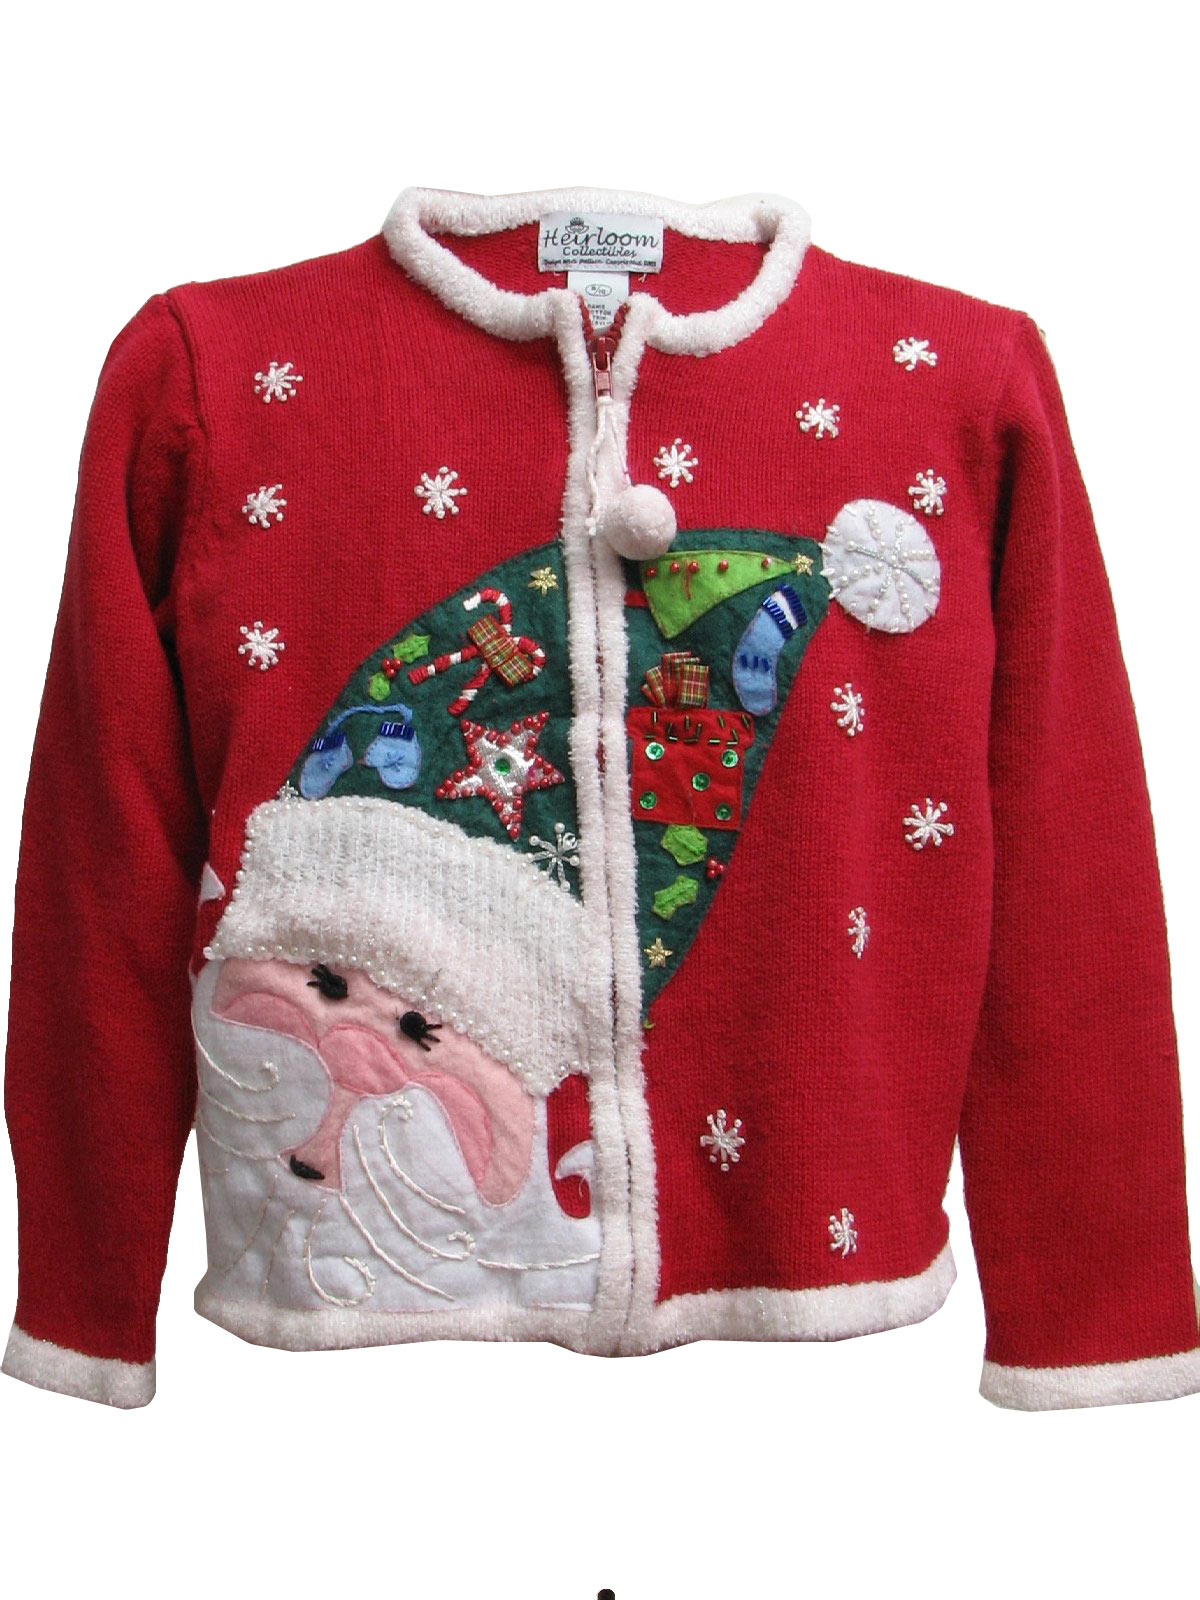 Childs Ugly Christmas Sweater: -Heirloom Collectibles- Girls or boys ...